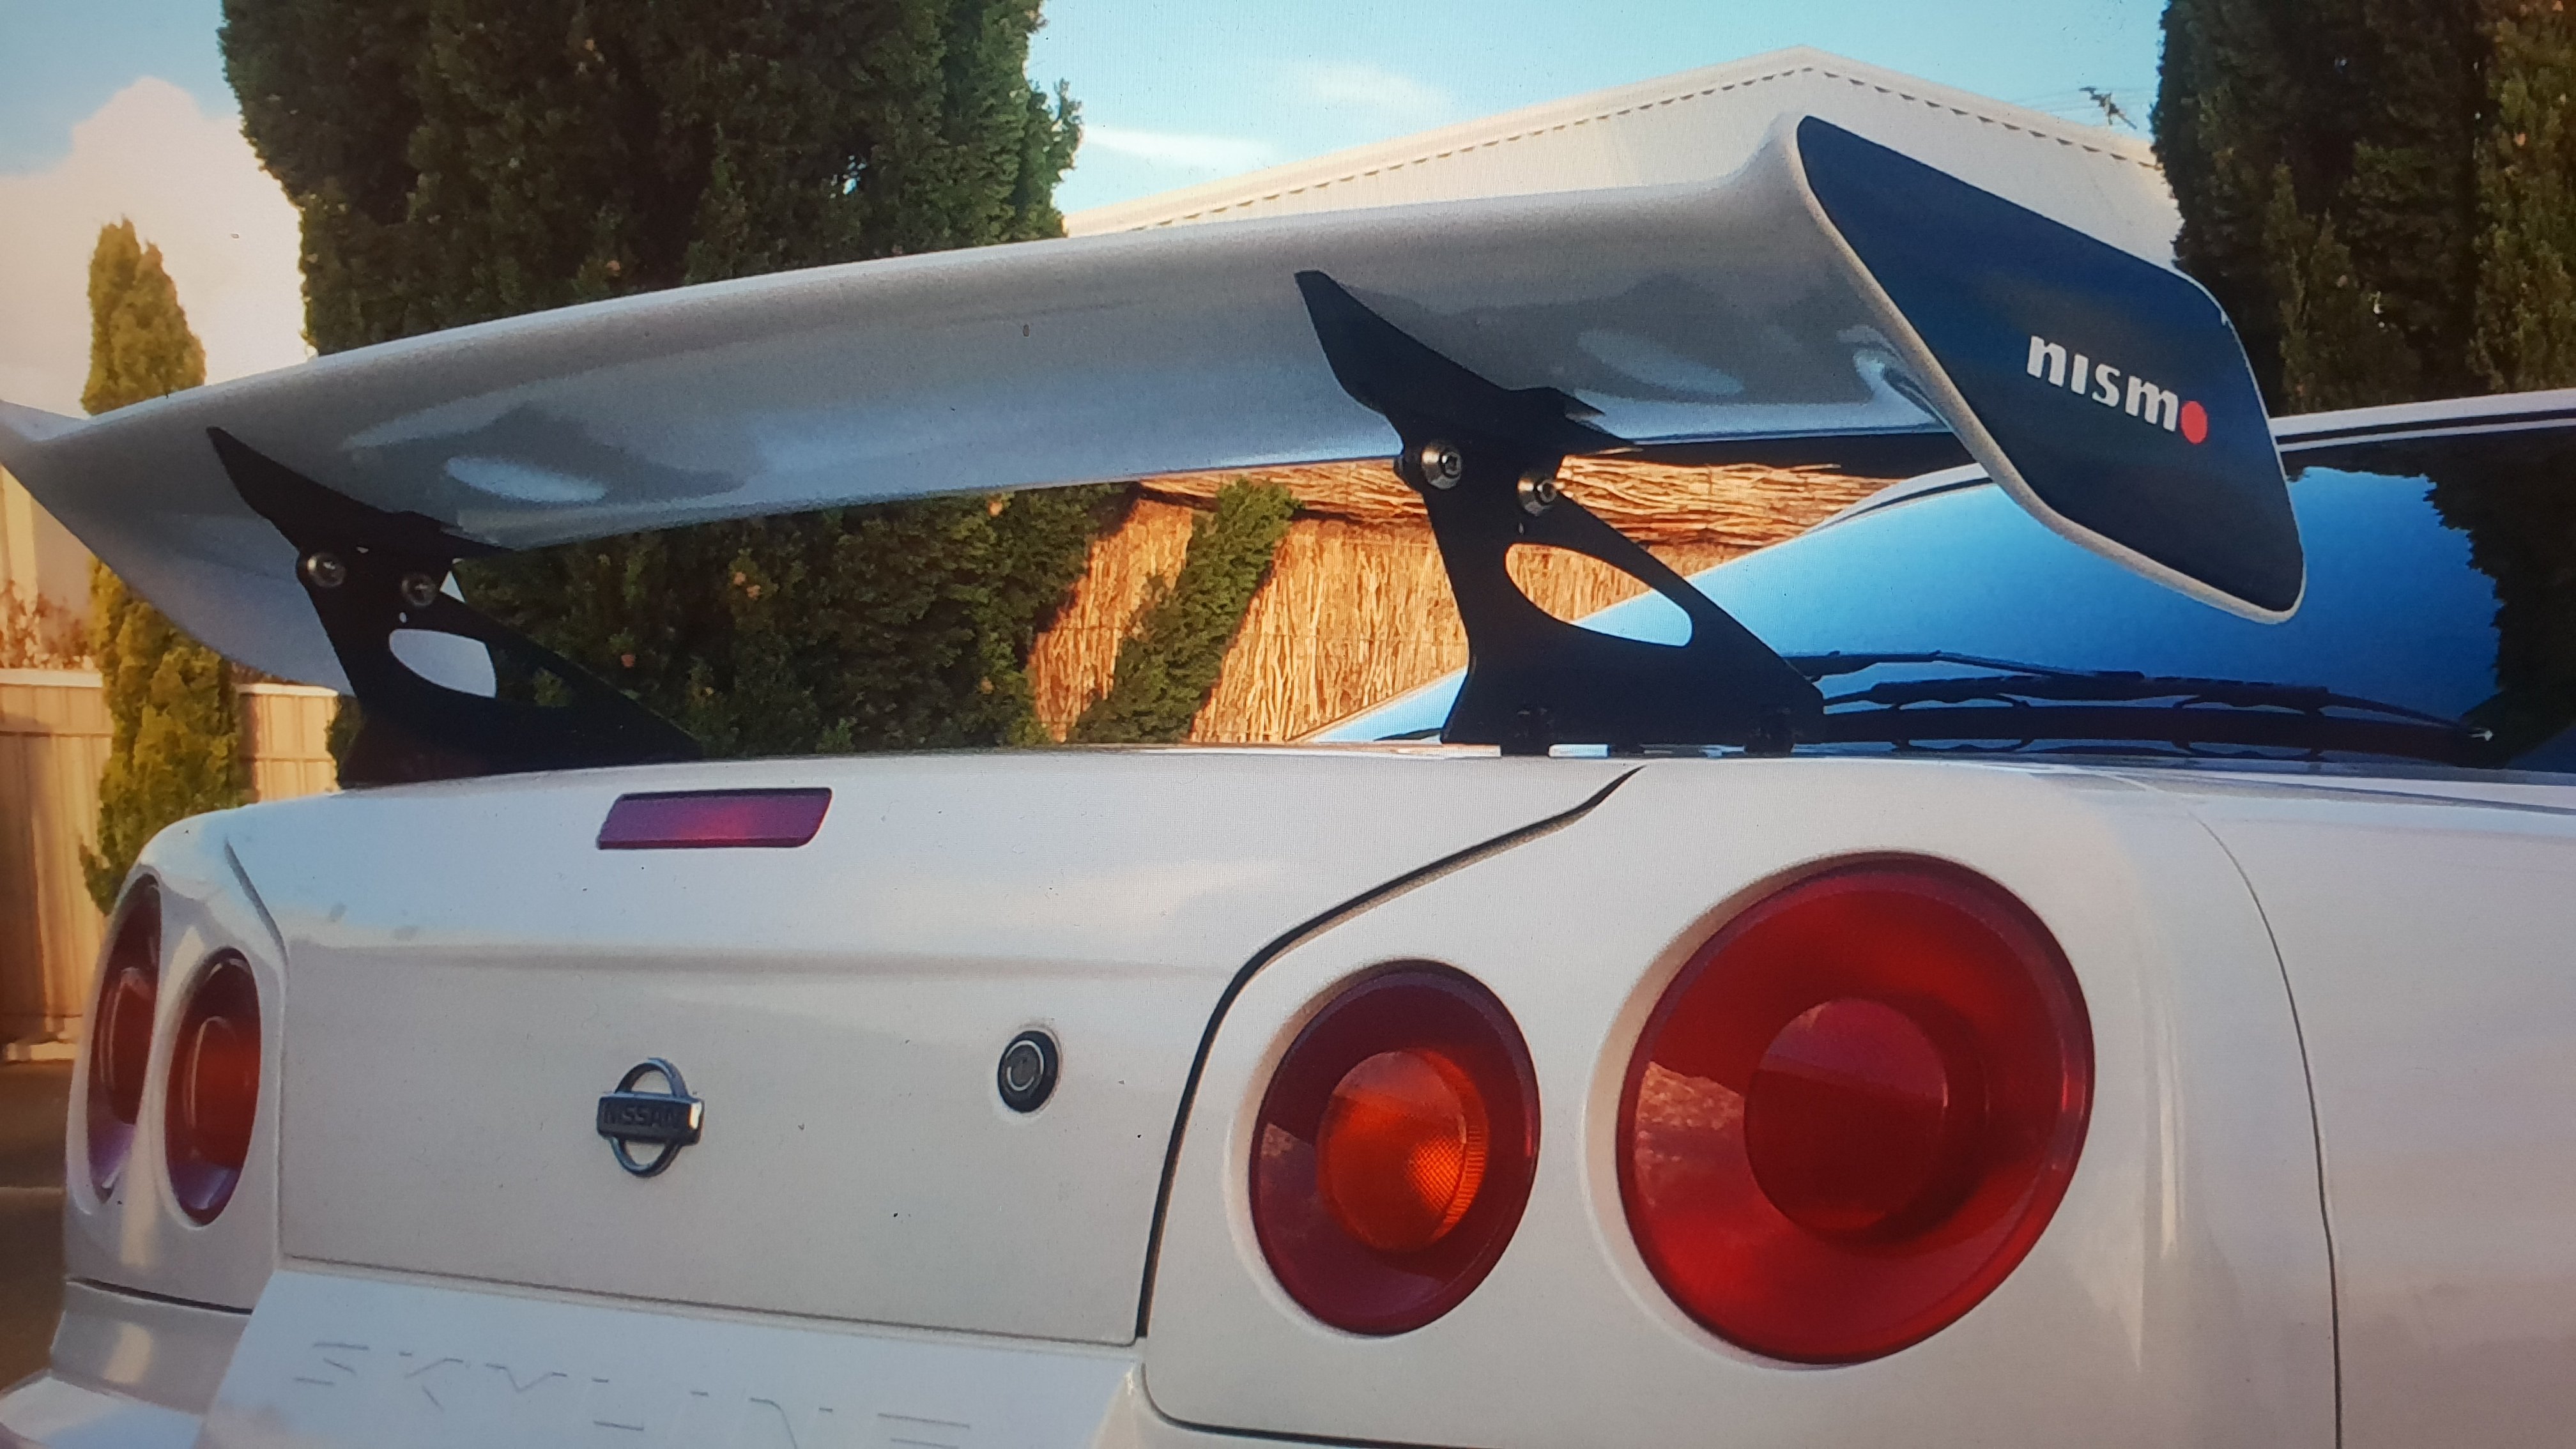 R34 Gtt Nismo Wing Stays For Sale Private Car Parts And